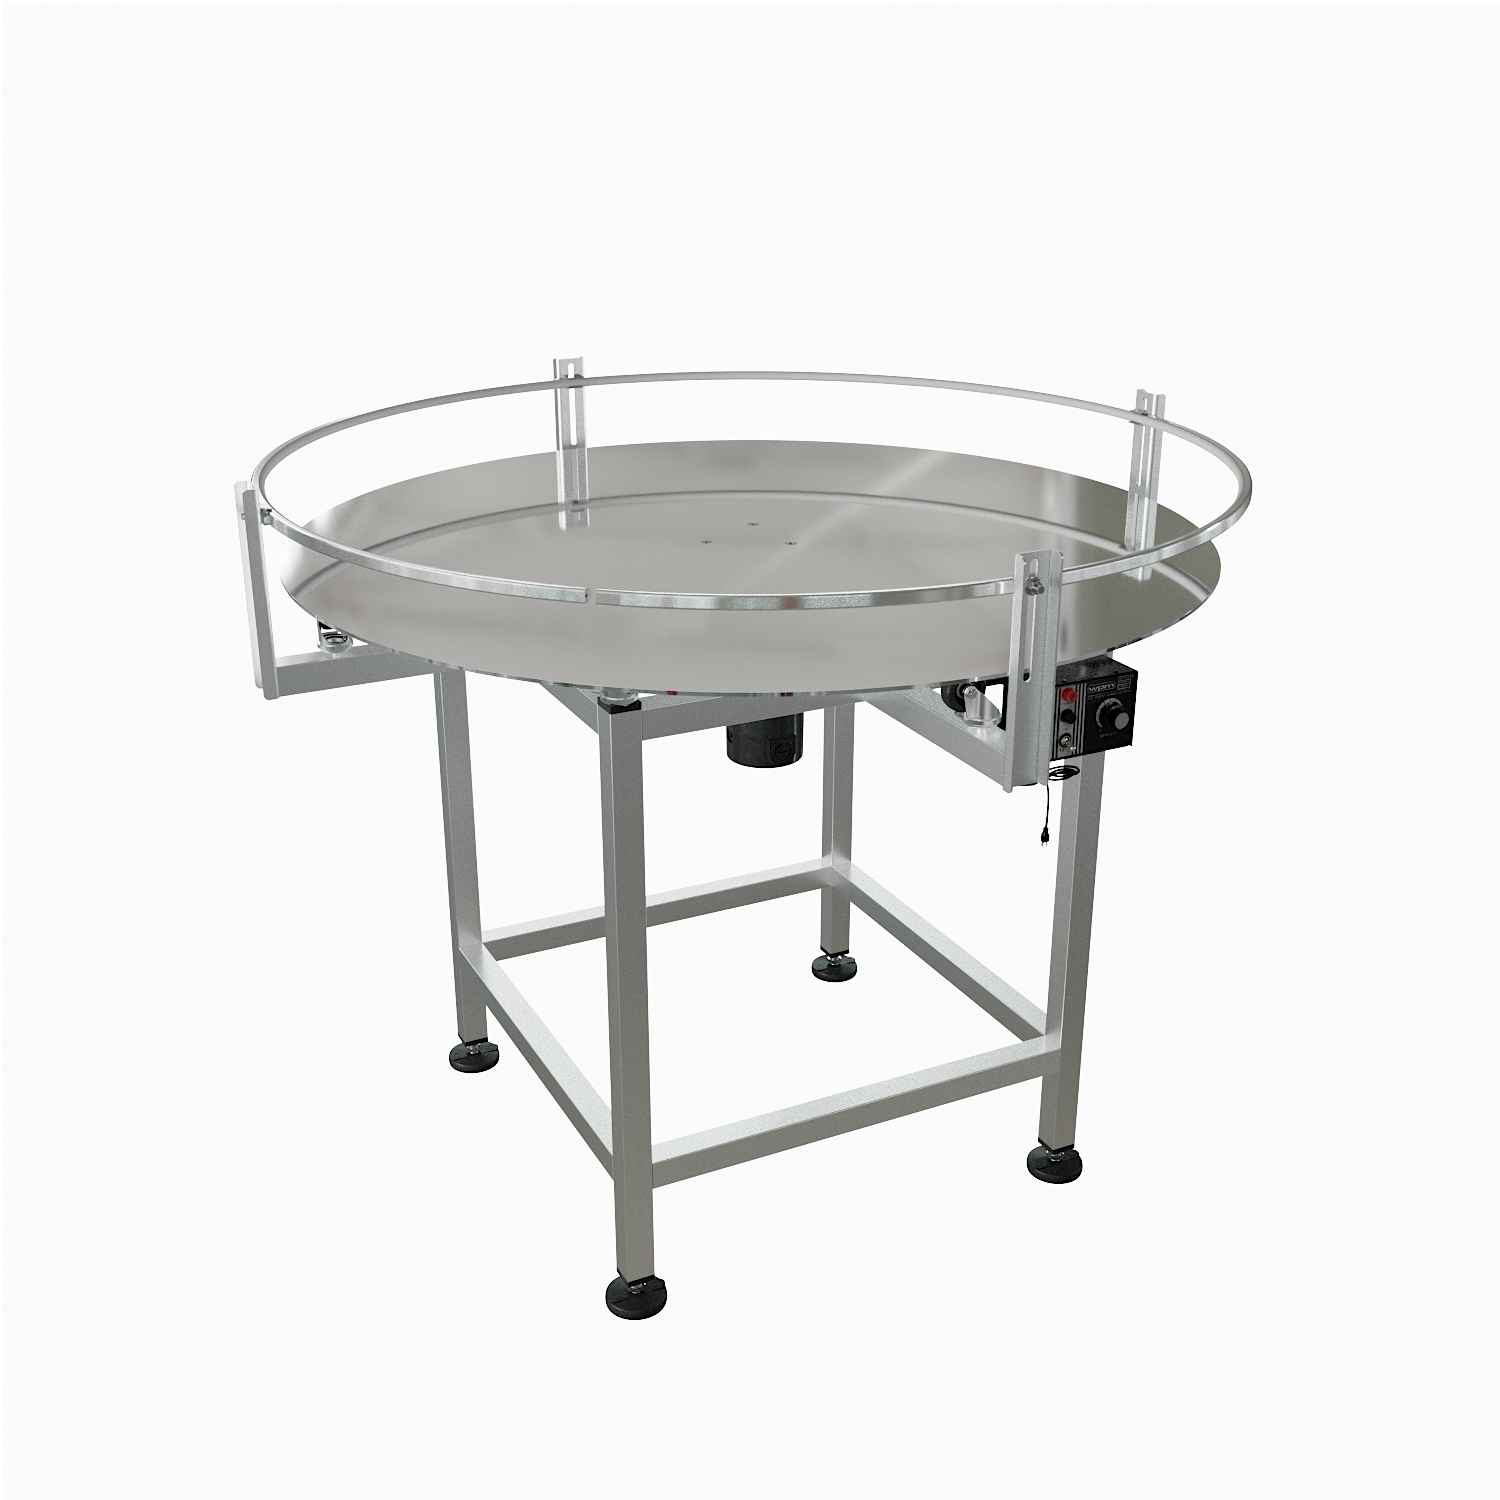 Furex 36" Dia Stainless Steel Rotary Table with In Feed Table and Unscrambler 